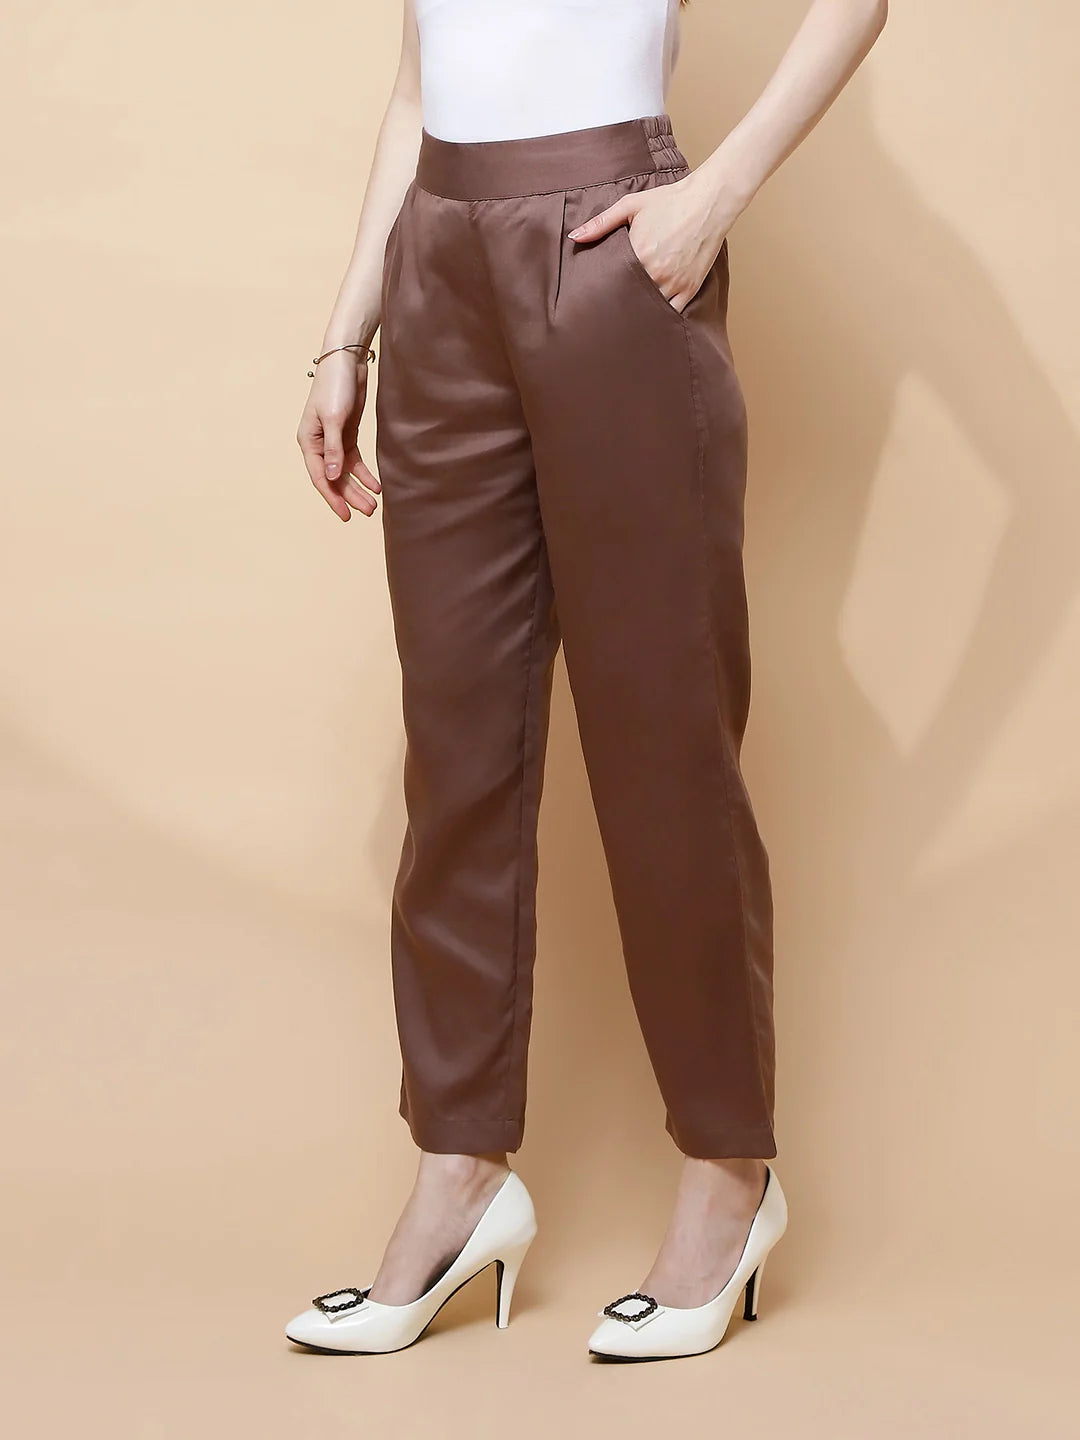 Deep Taupe Rayon Regular Fit Lower For Women